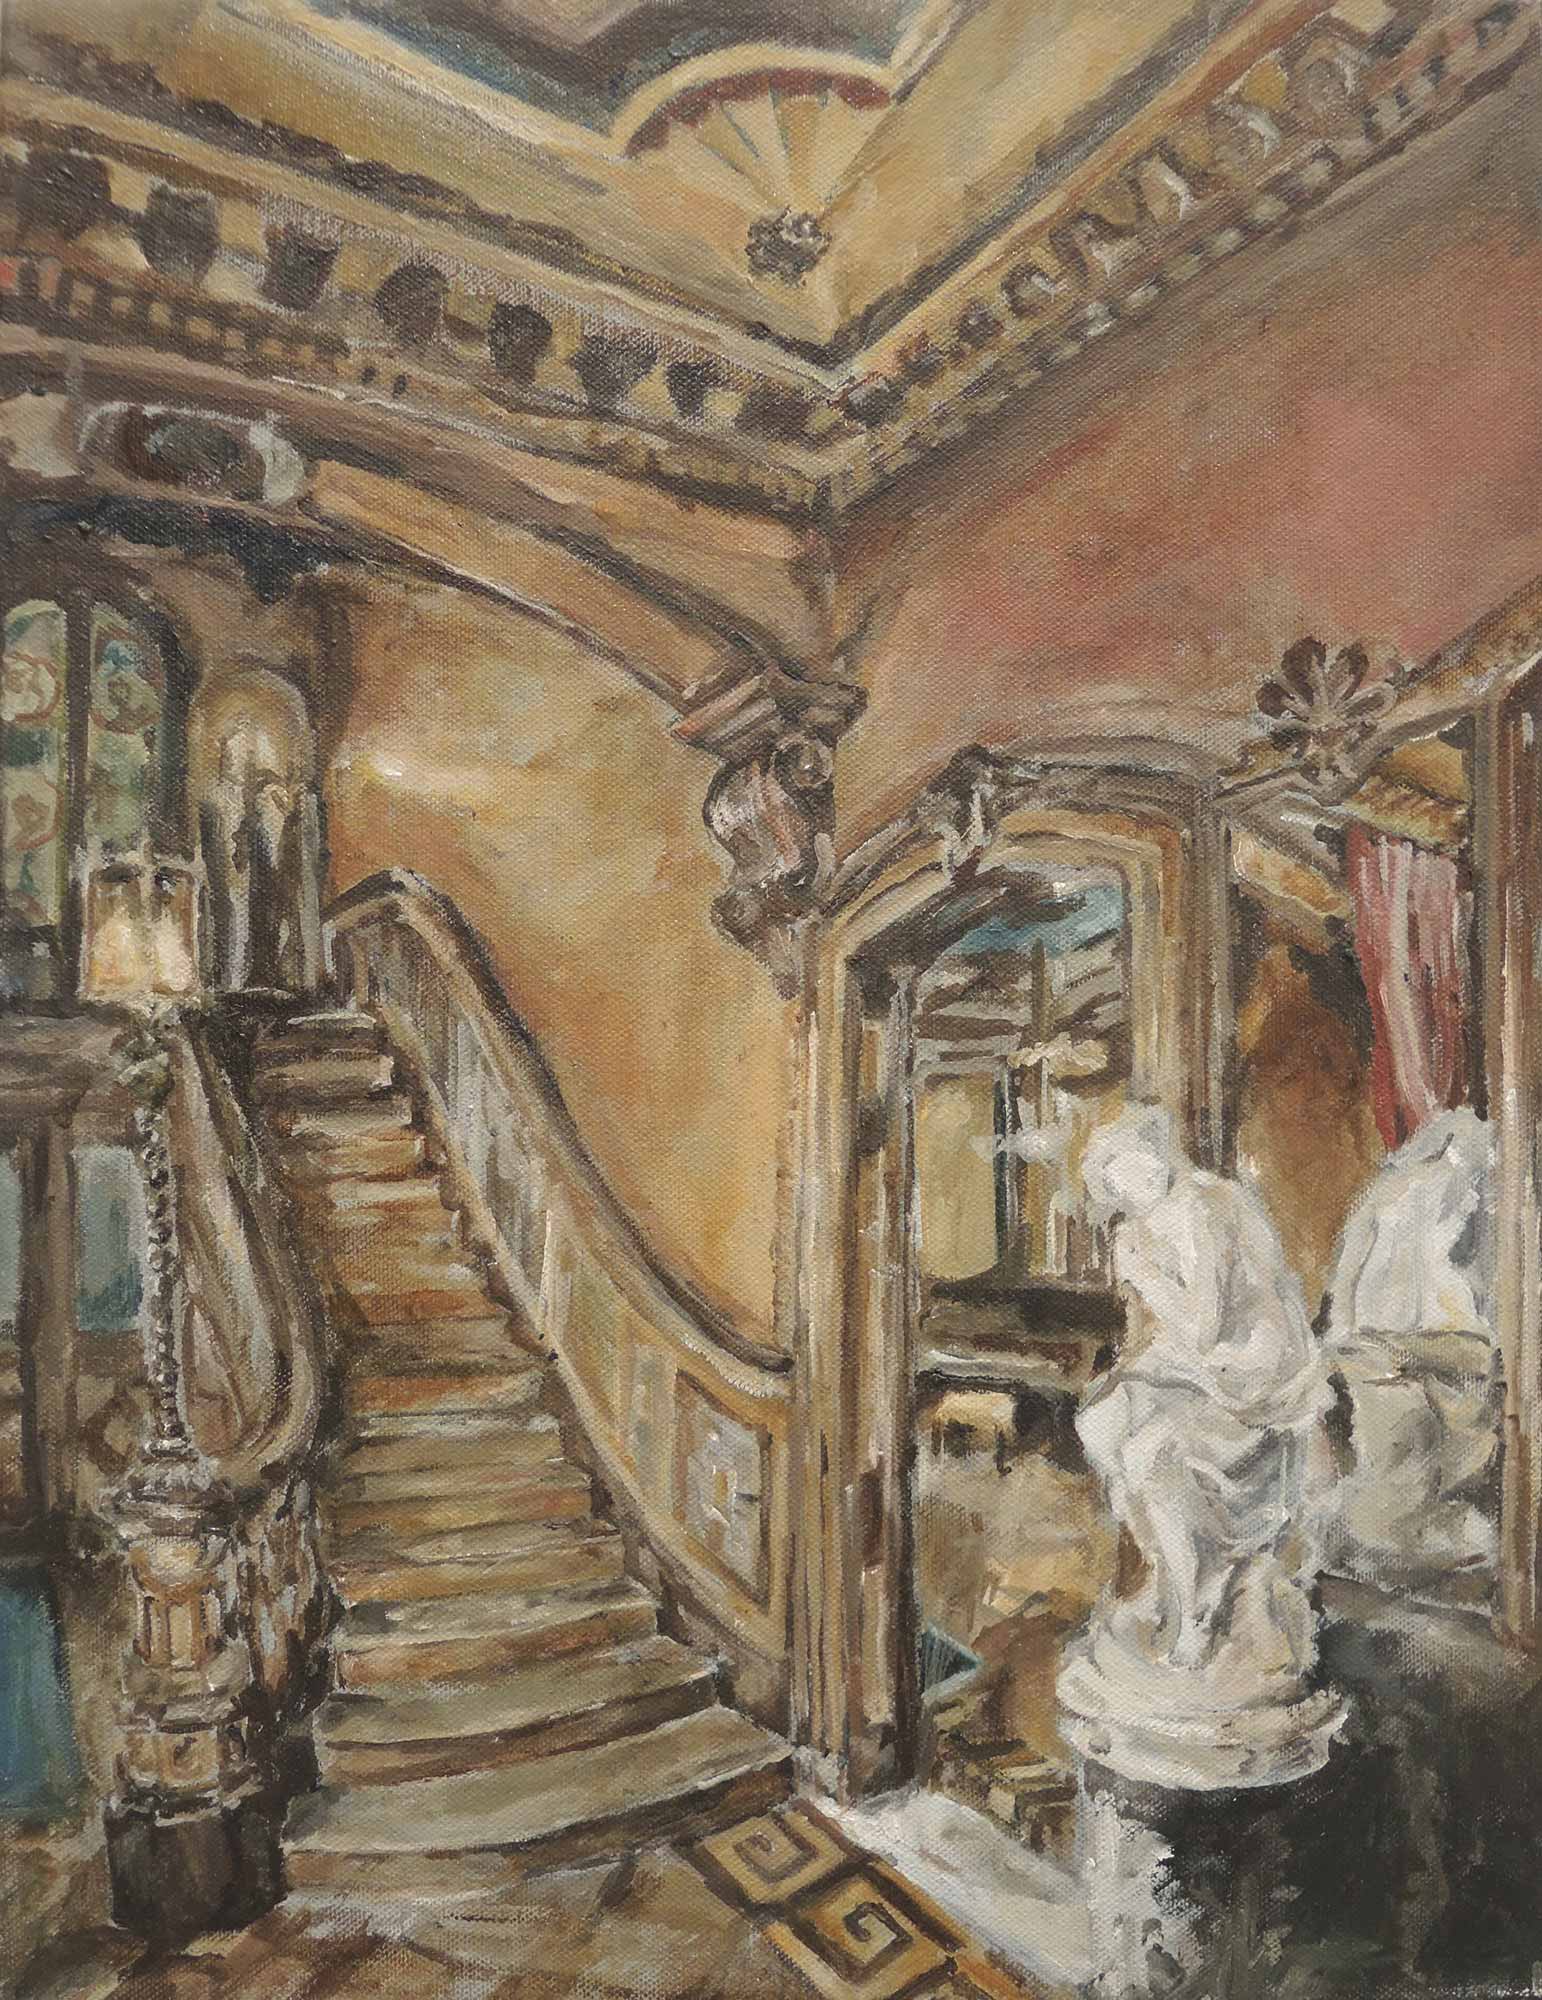 A painting of a decorative home interior with a staircase